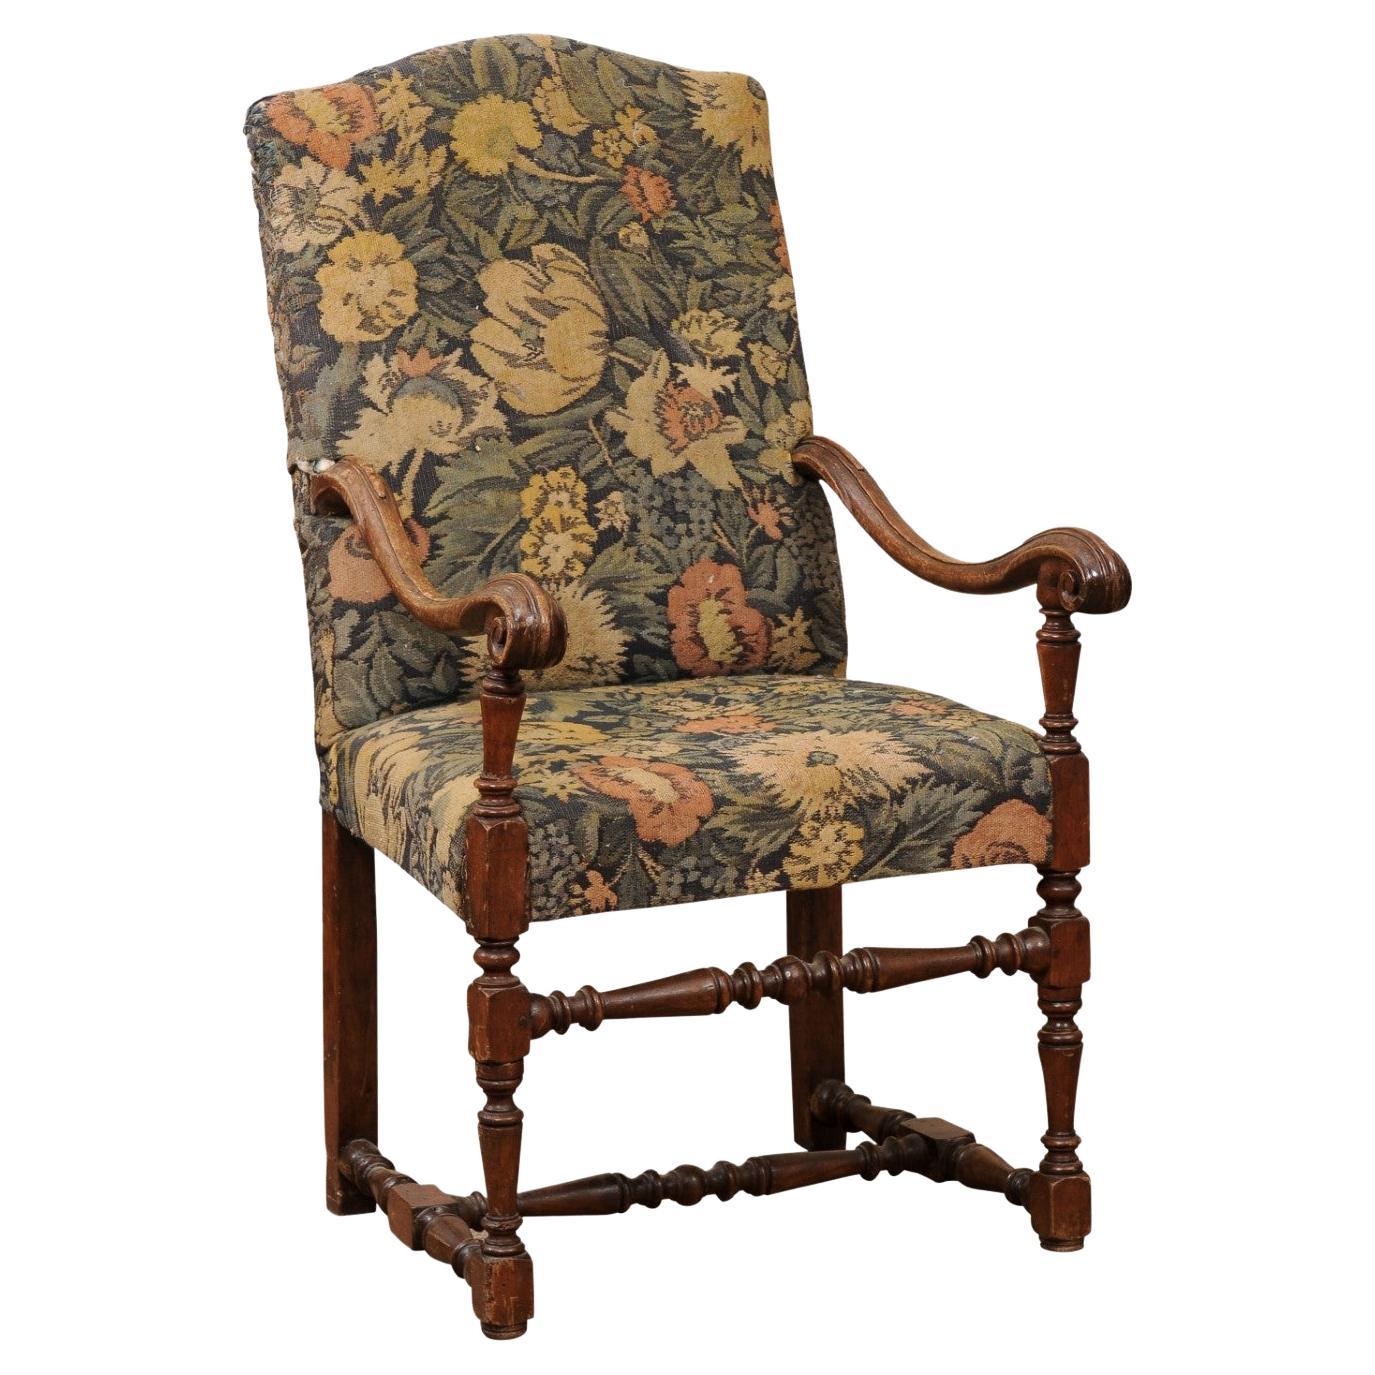 Large 18th Century French Louis XIII Style Walnut Fauteuil